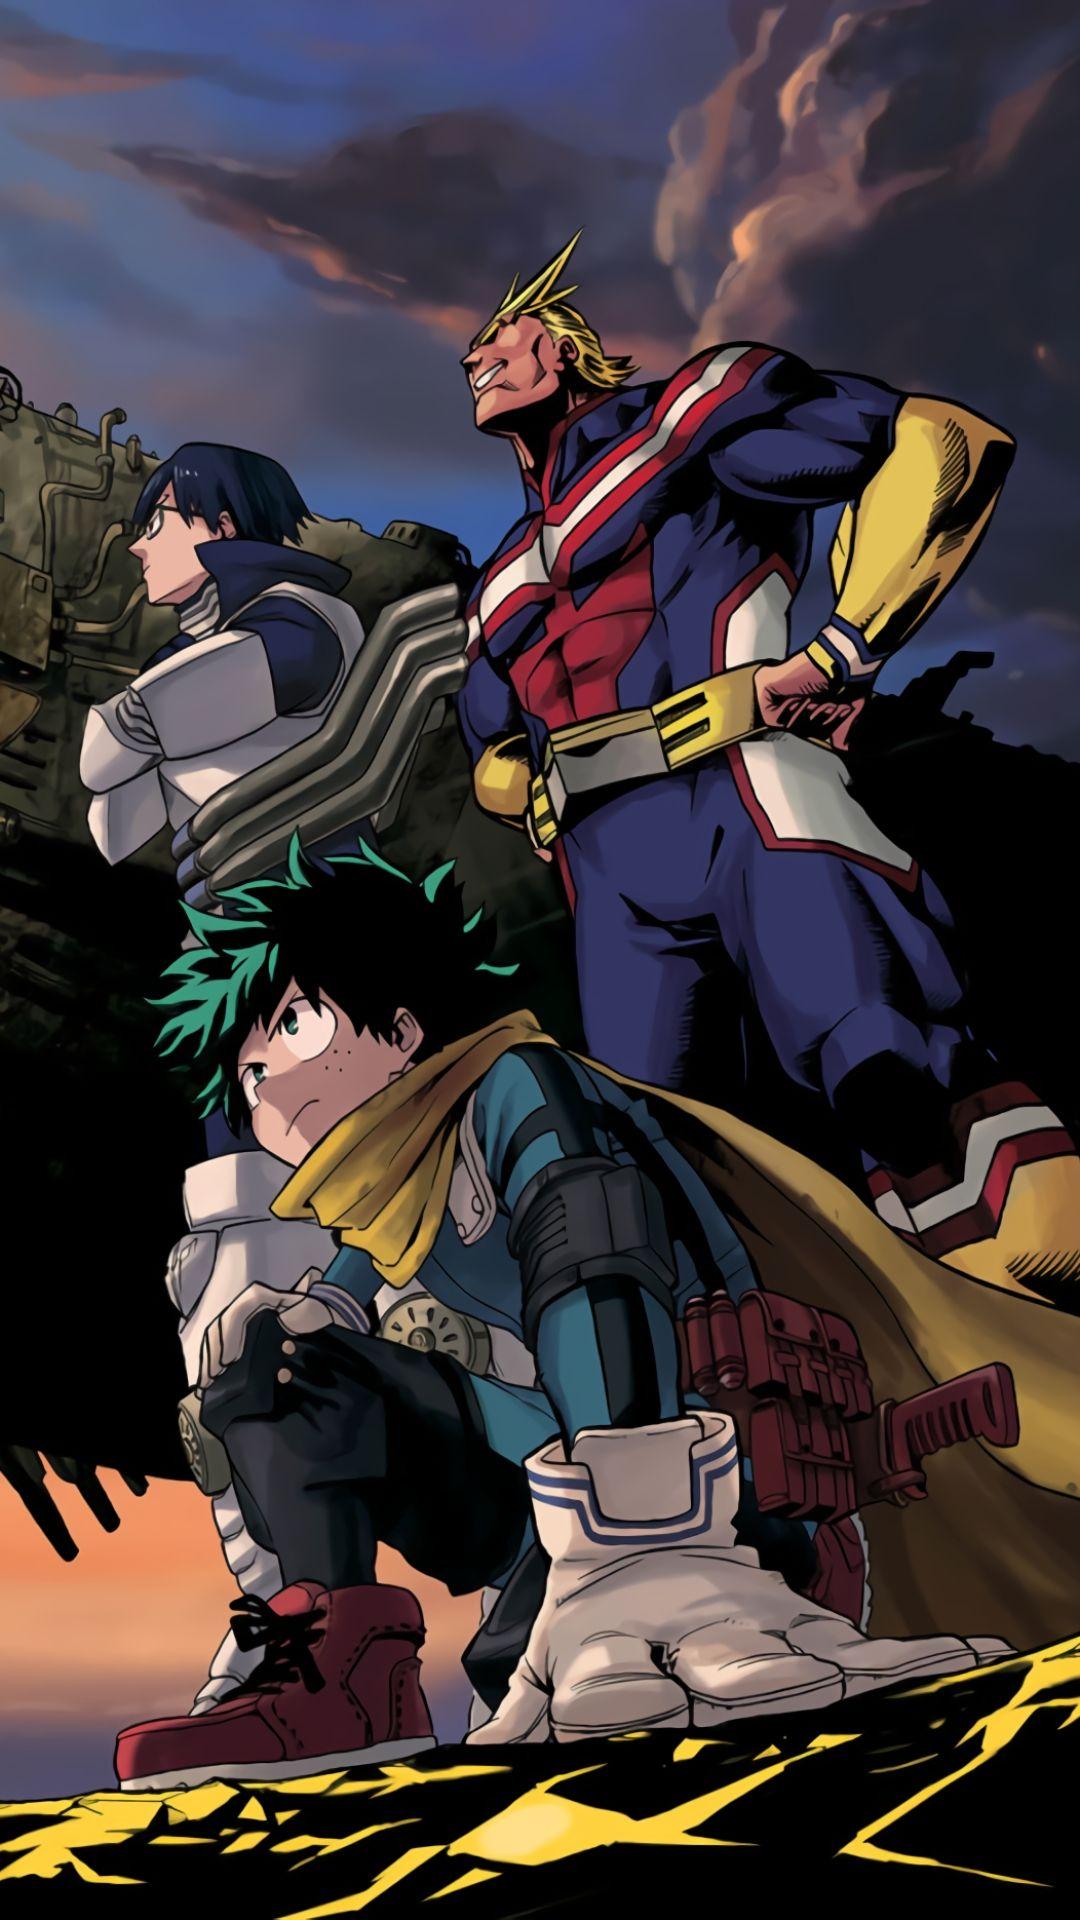 My Hero Academia wallpaper 1080x1920 for iPhone and Android - My Hero Academia